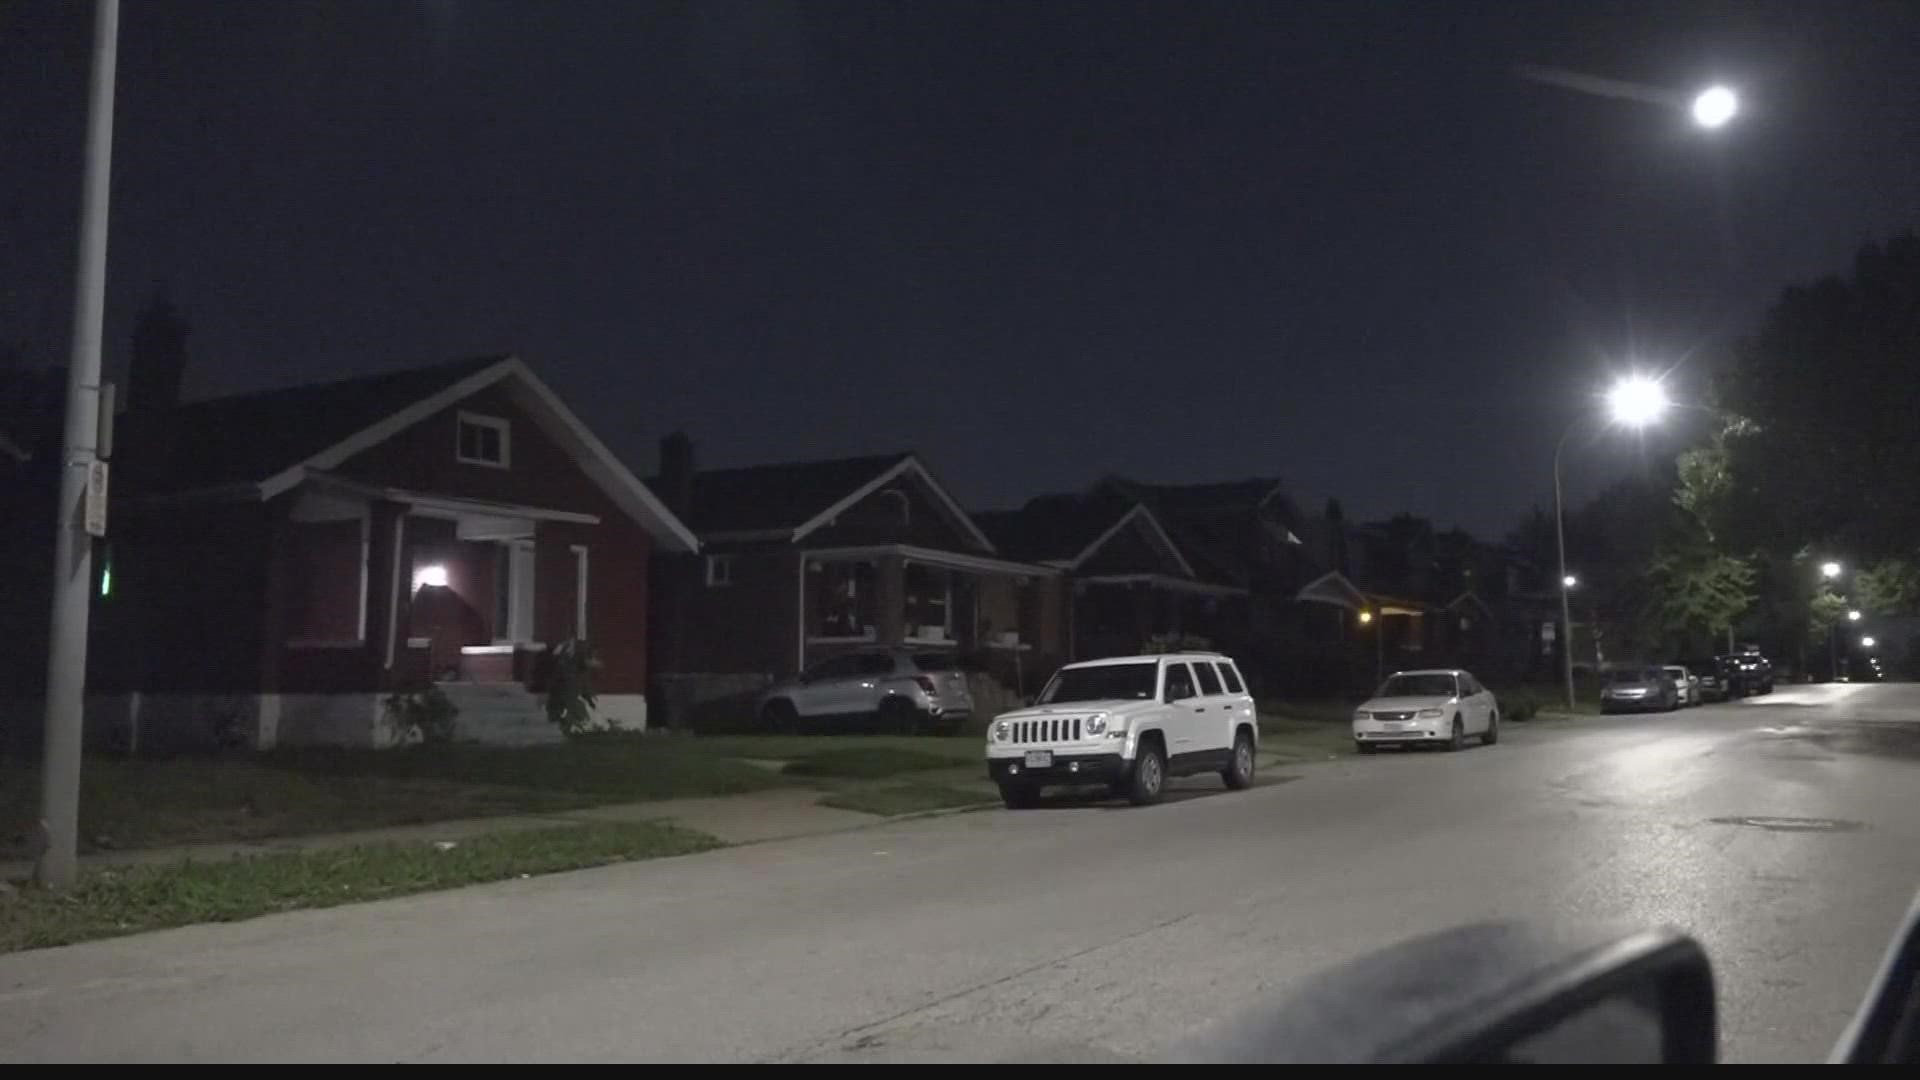 A 12-year-old girl is in critical condition after she was shot late Tuesday night in St. Louis. Police said she was shot in the back of the head.